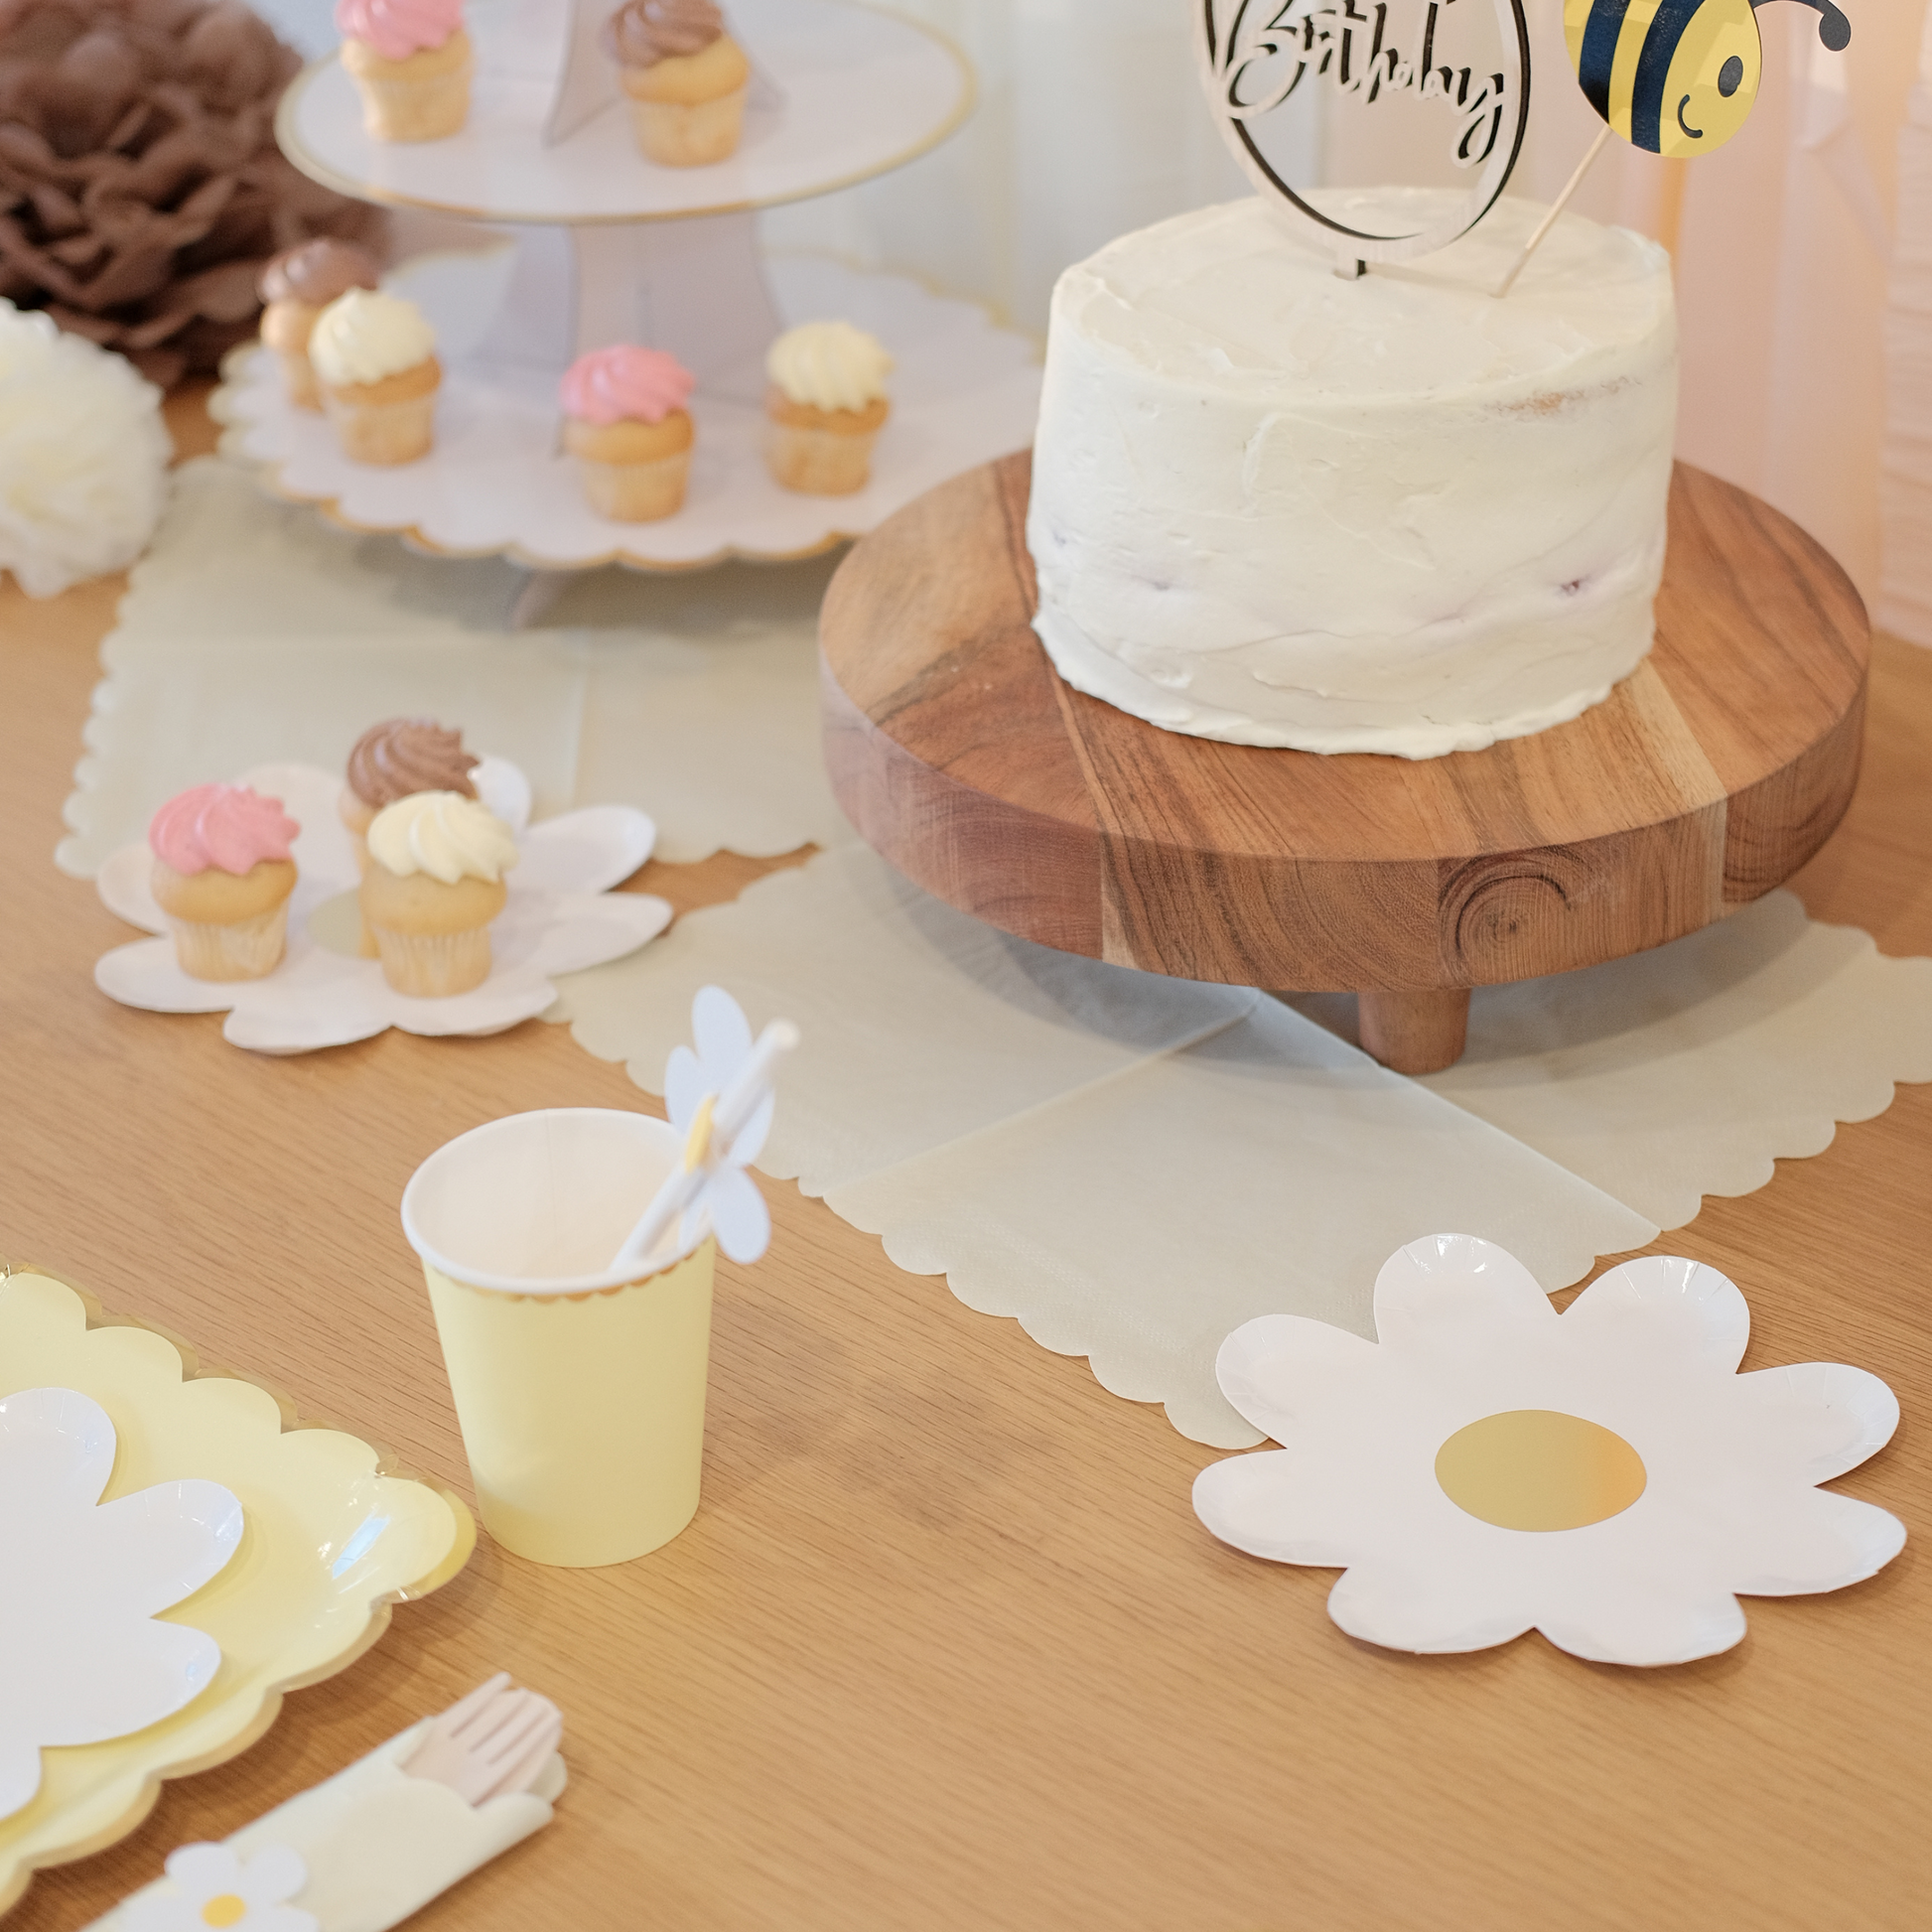 Blooming Daisy Box | Party In A Box | Bowtique Decor | Blooming daisy box contain themed party essentials for 8 guests.